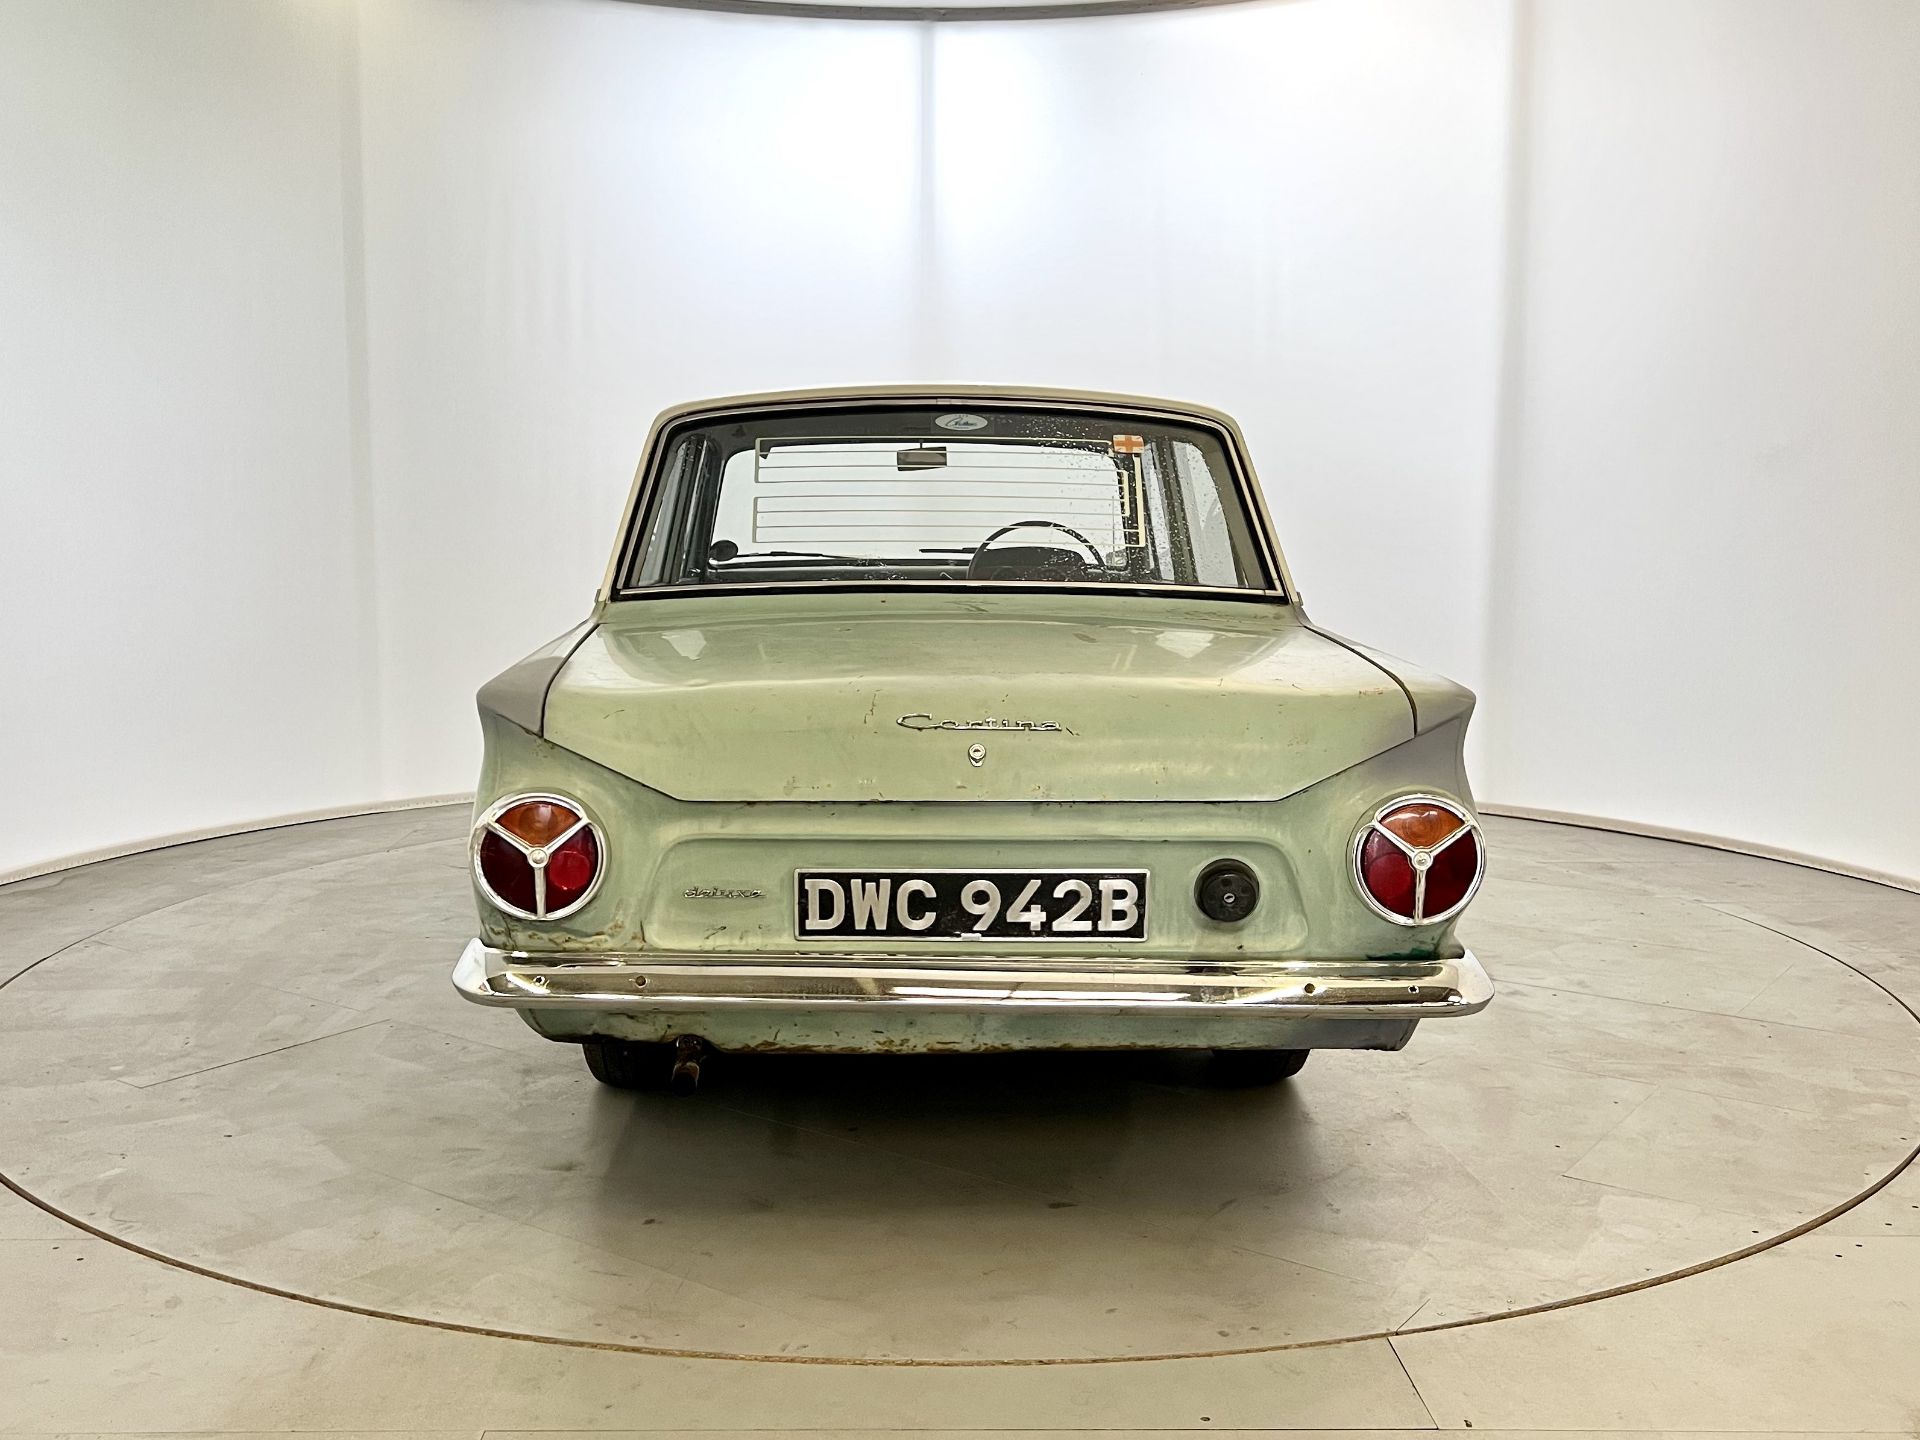 Ford Cortina Deluxe - Image 8 of 31